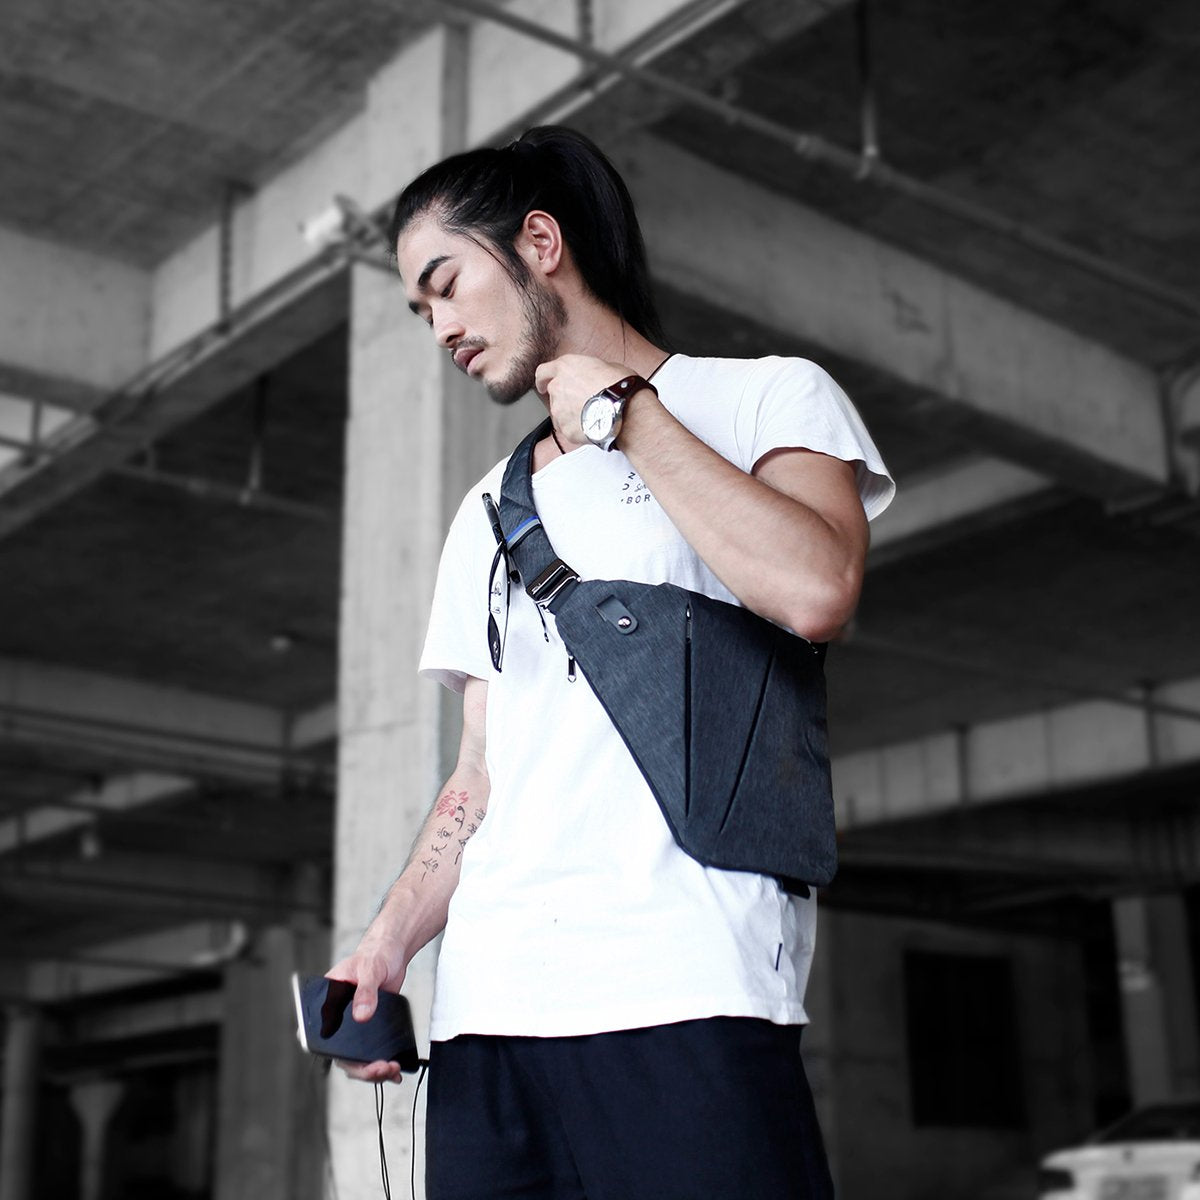 FINO IV Chest Bag #niid #chestbag #mensbag #travel #cycling #goodthing  #musthave #bag #fashion | Instagram